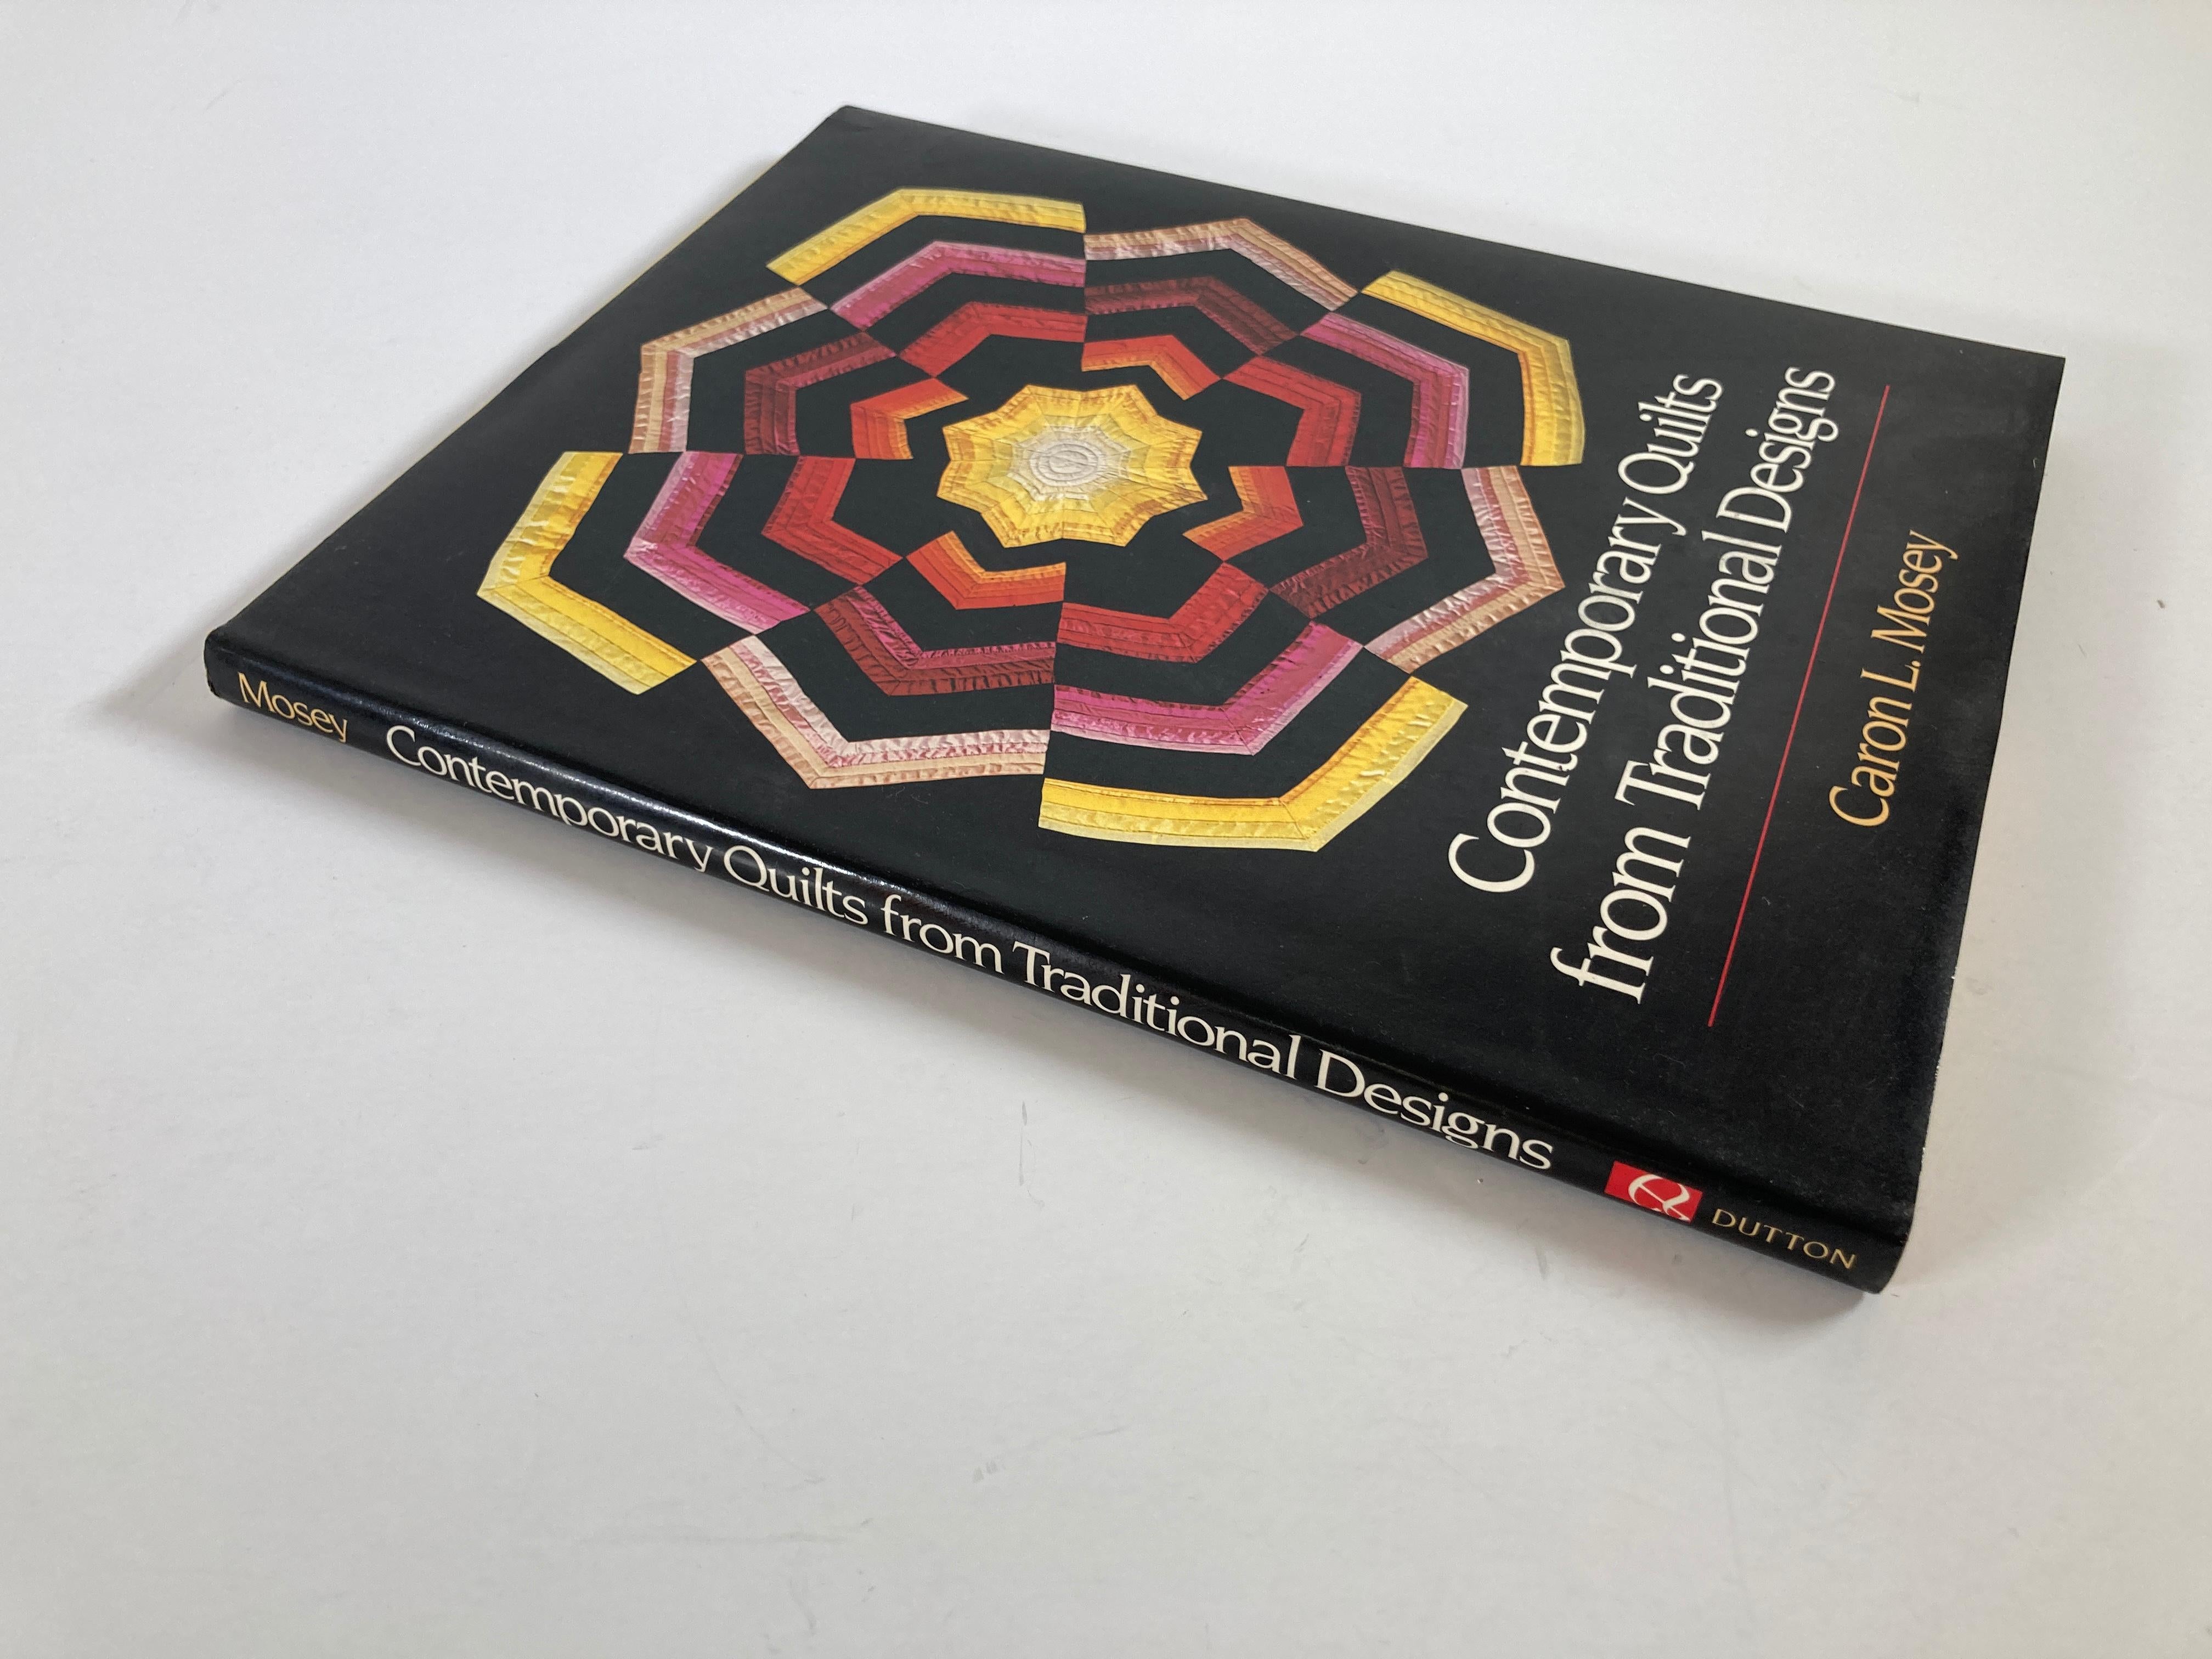 Contemporary quilts from Traditional Designs by Mosey, Carol L
Format/binding hardcover
Book condition
Used - fine
Jacket condition
Very good +
First edition, first printing so stated with full number line
Publisher Dutton Adult
Place Of